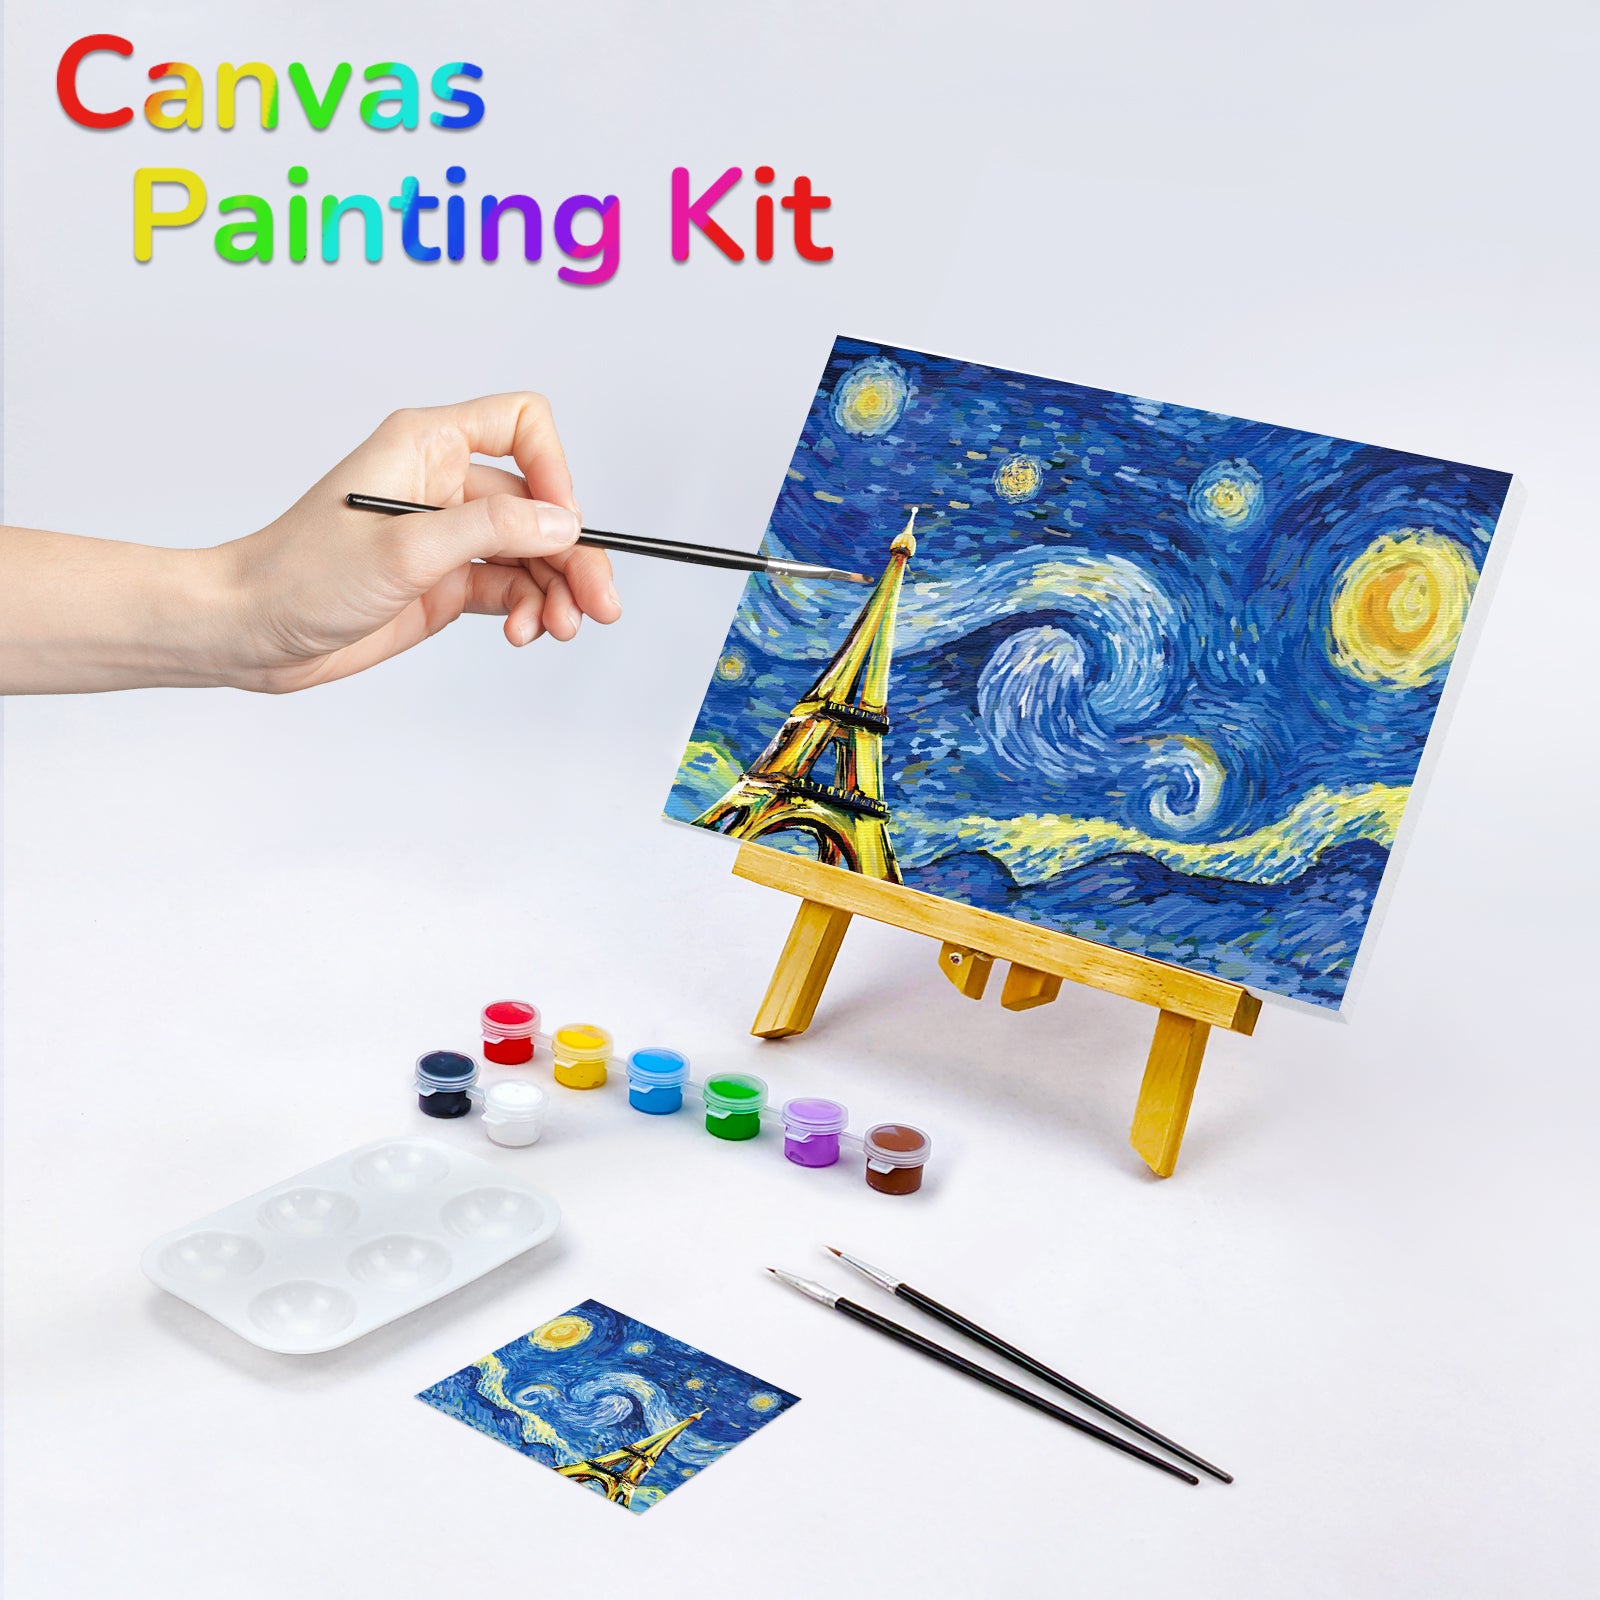 Paint Party Kit Birthday at Home DIY sip & Paint Kit Children's Art Kit  Pre-traced Canvas for Home Events Price for One Canvas per Kit. 